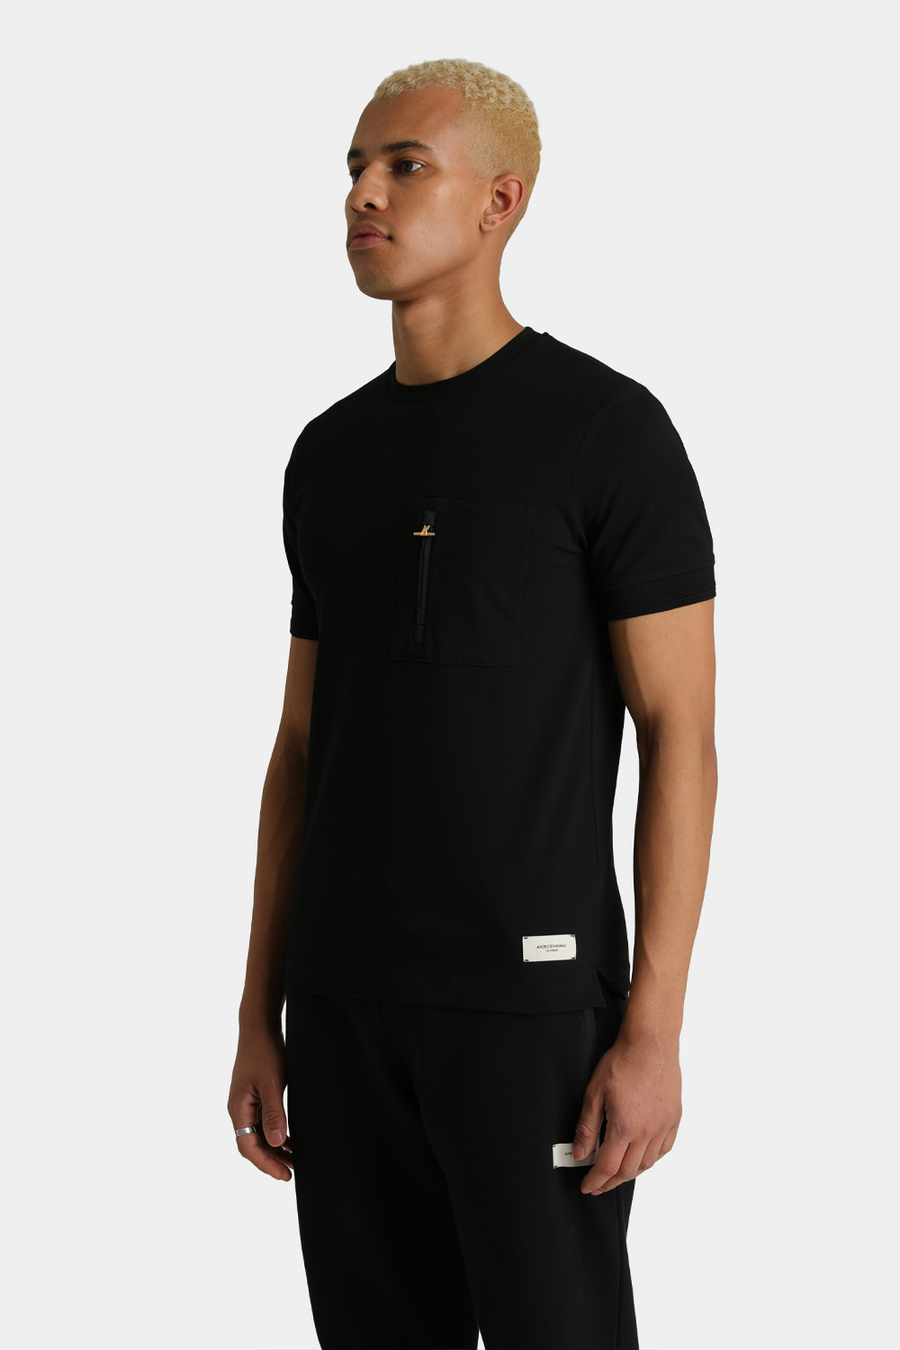 Buy the Android Homme Zip Pocket T-Shirt Black at Intro. Spend £50 for free UK delivery. Official stockists. We ship worldwide.